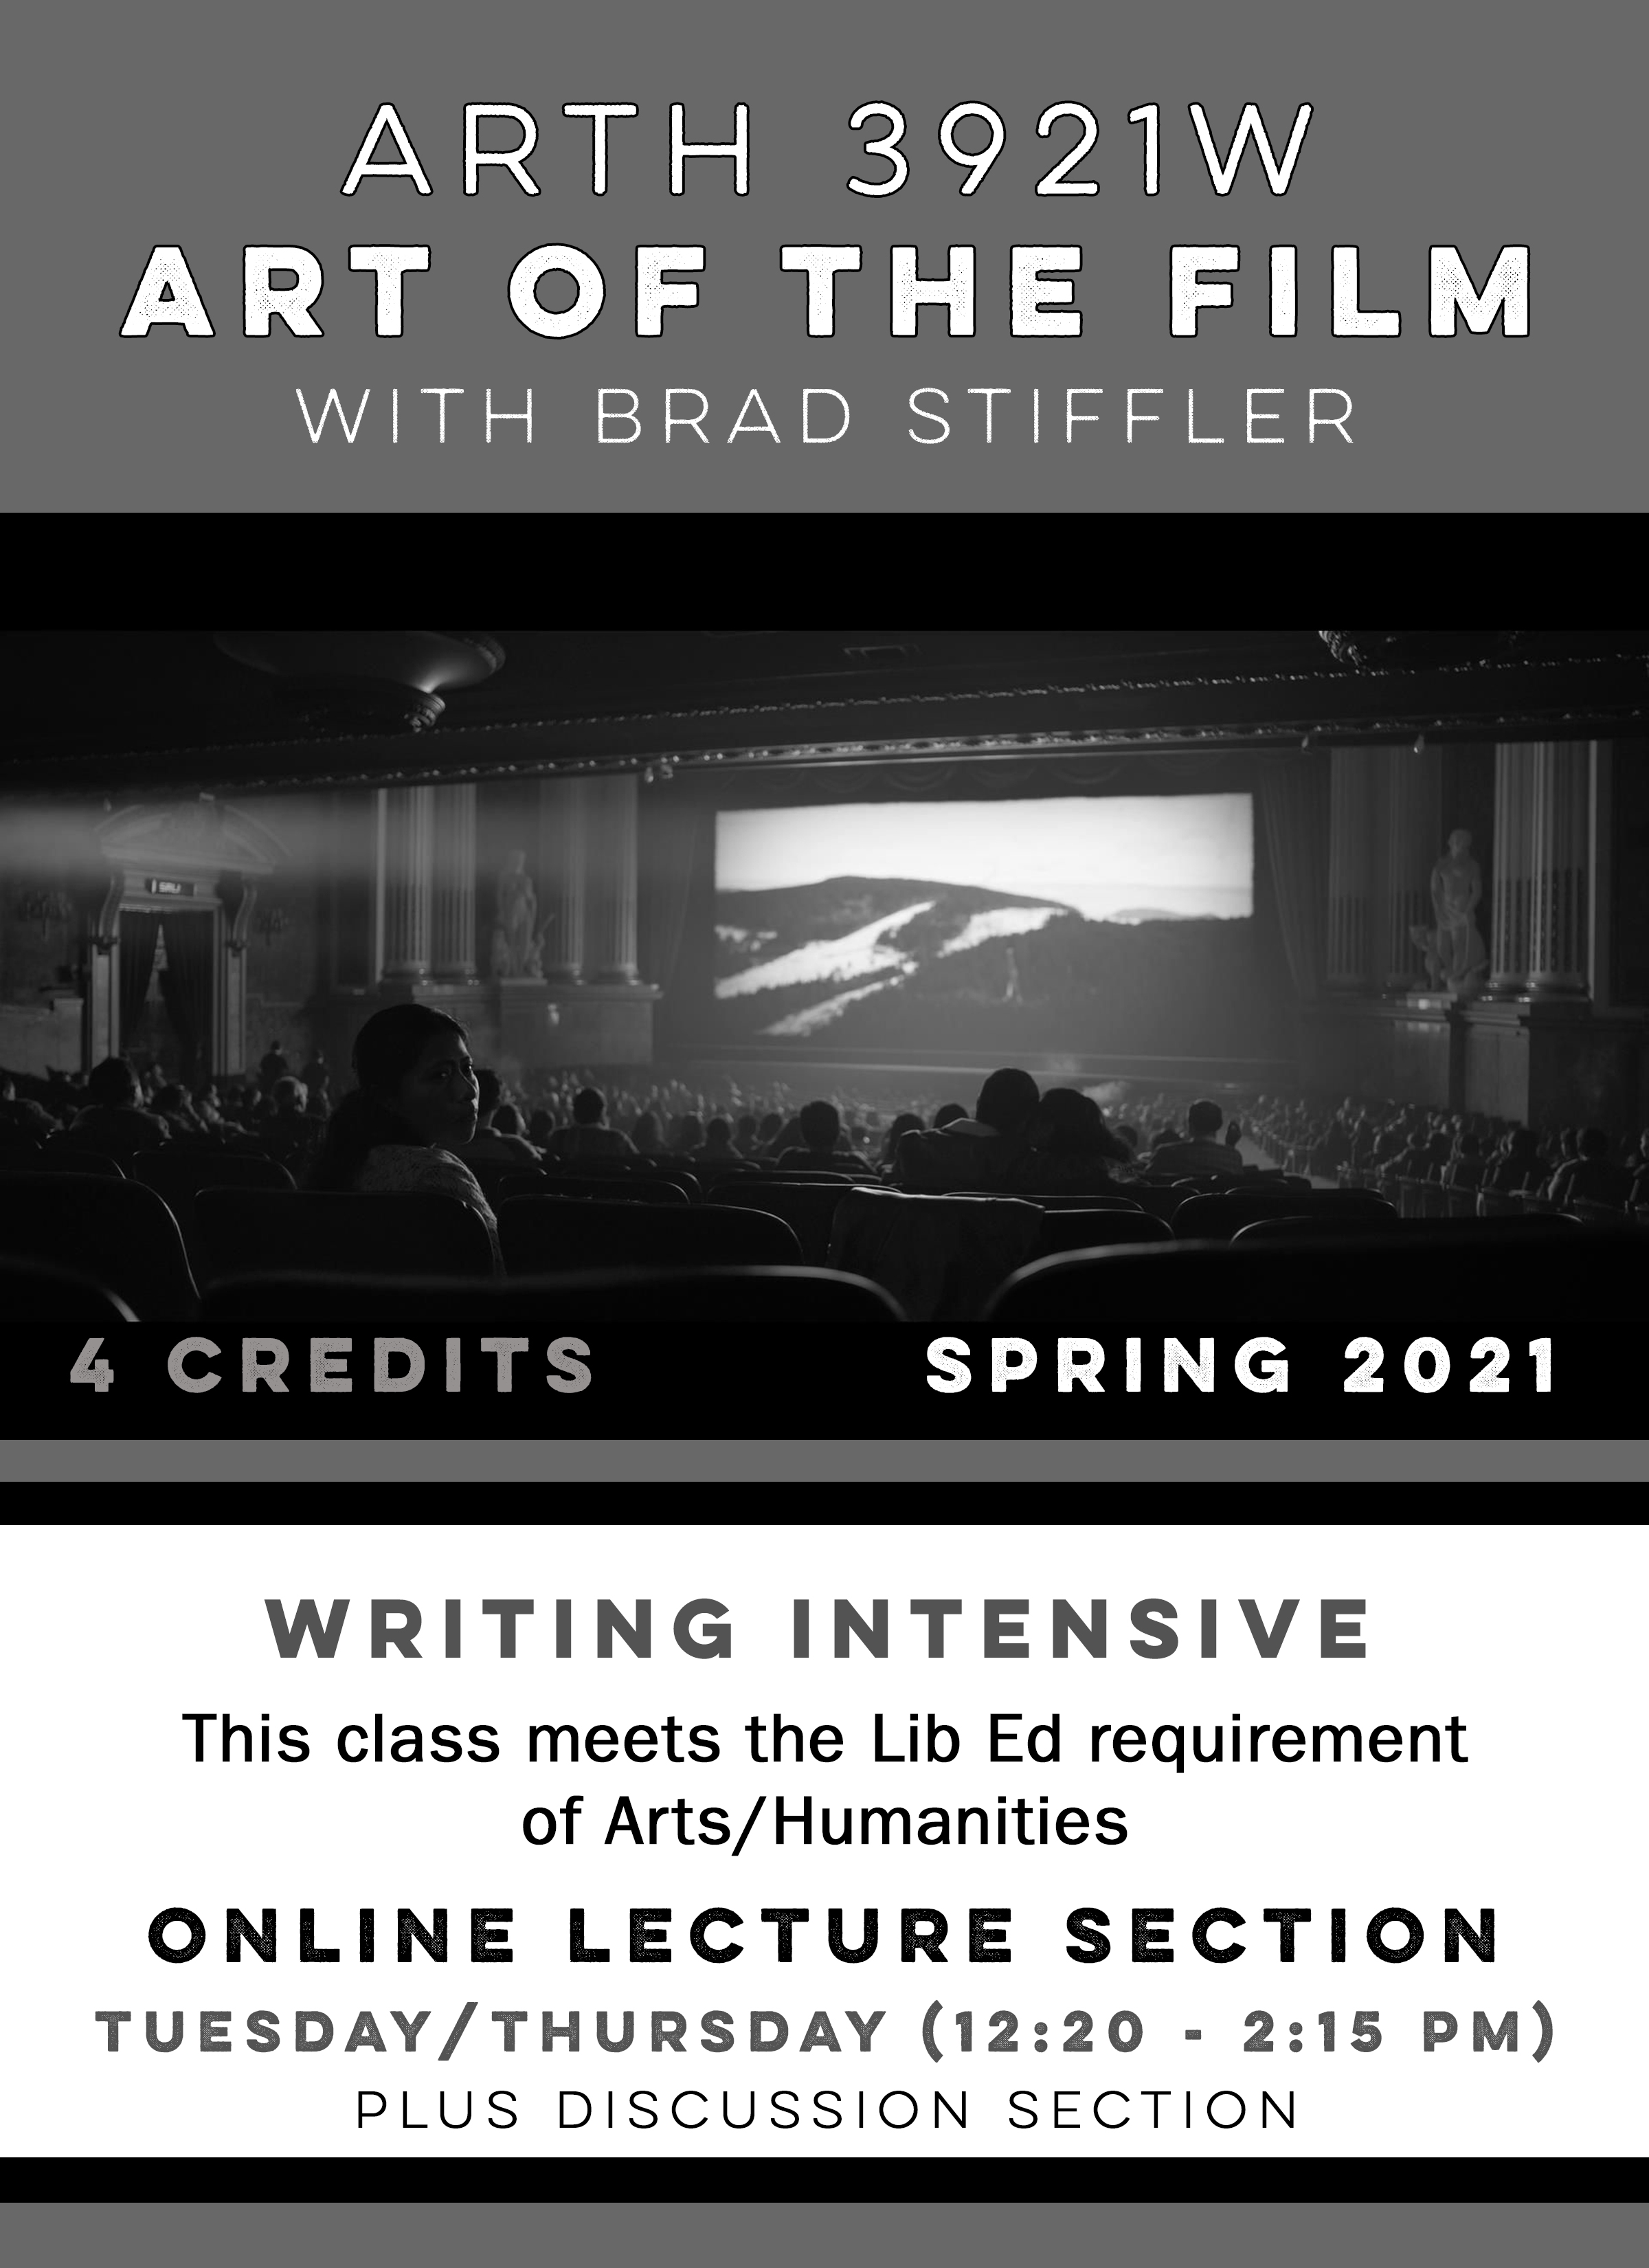 Course poster for ARTH 3921W Art of the Film with Brad Stiffler. 4 credits. Writing Intensive. This class meets the lib ed requirement for arts/humanities. Online lecture section Tues/Thurs 12:20-2:15pm plus discussion section. Image: movie theater